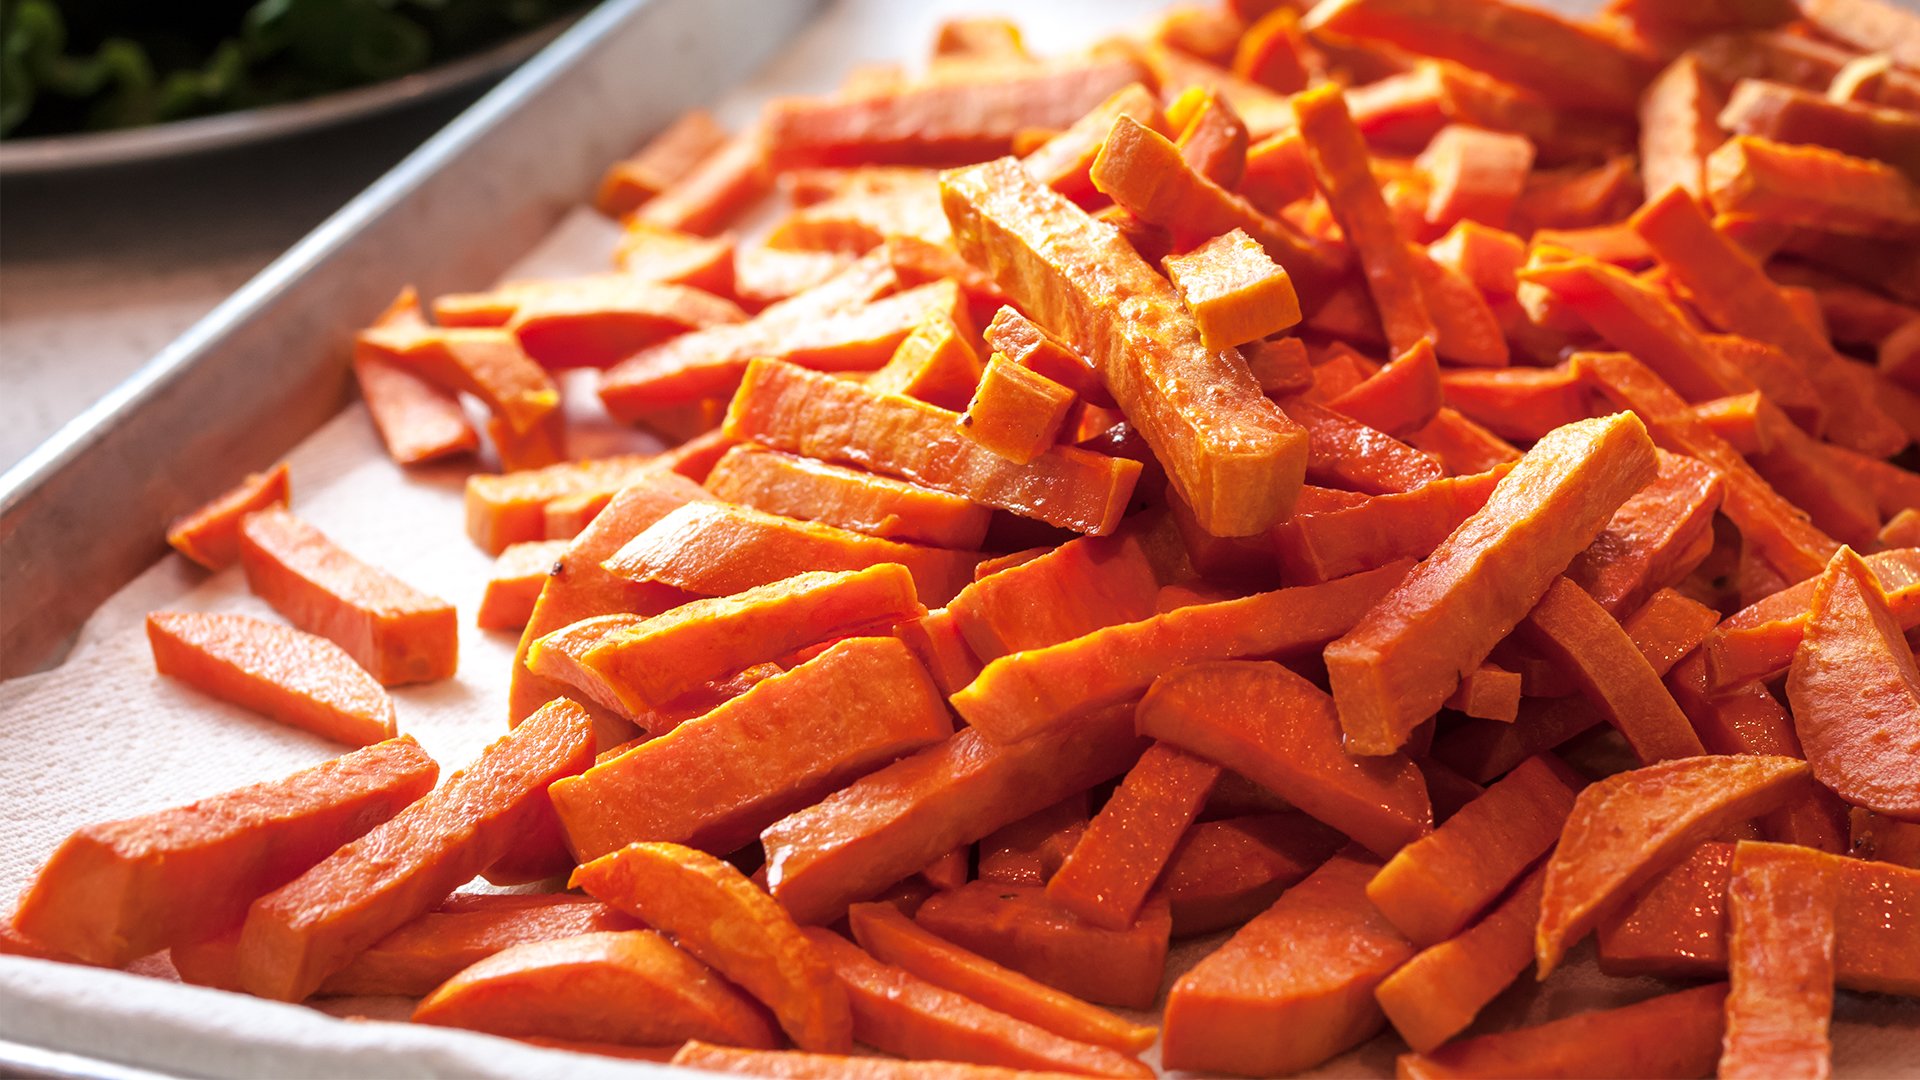 Sweet potato fries and chips